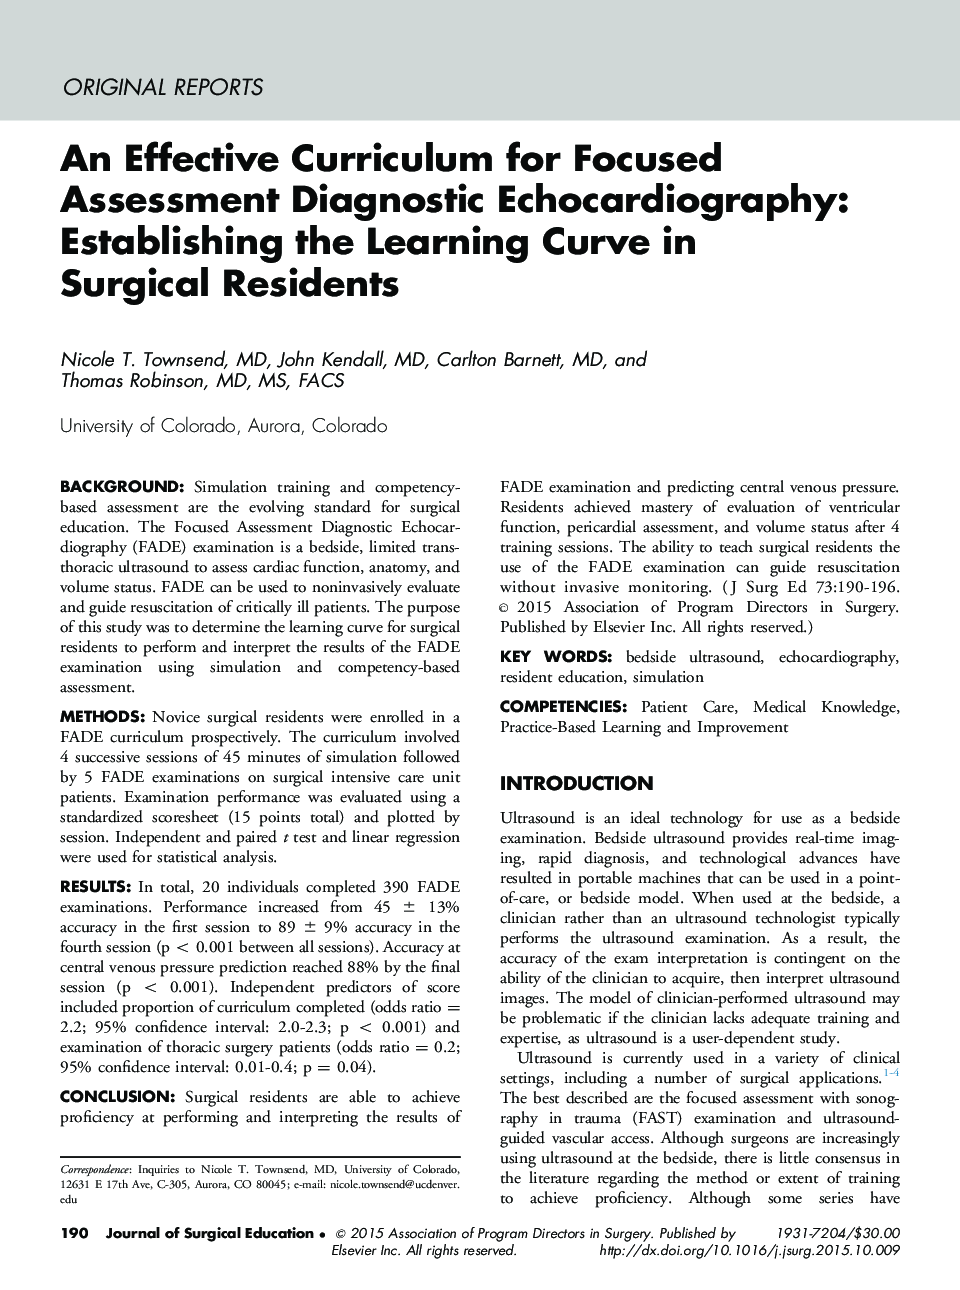 An Effective Curriculum for Focused Assessment Diagnostic Echocardiography: Establishing the Learning Curve in Surgical Residents